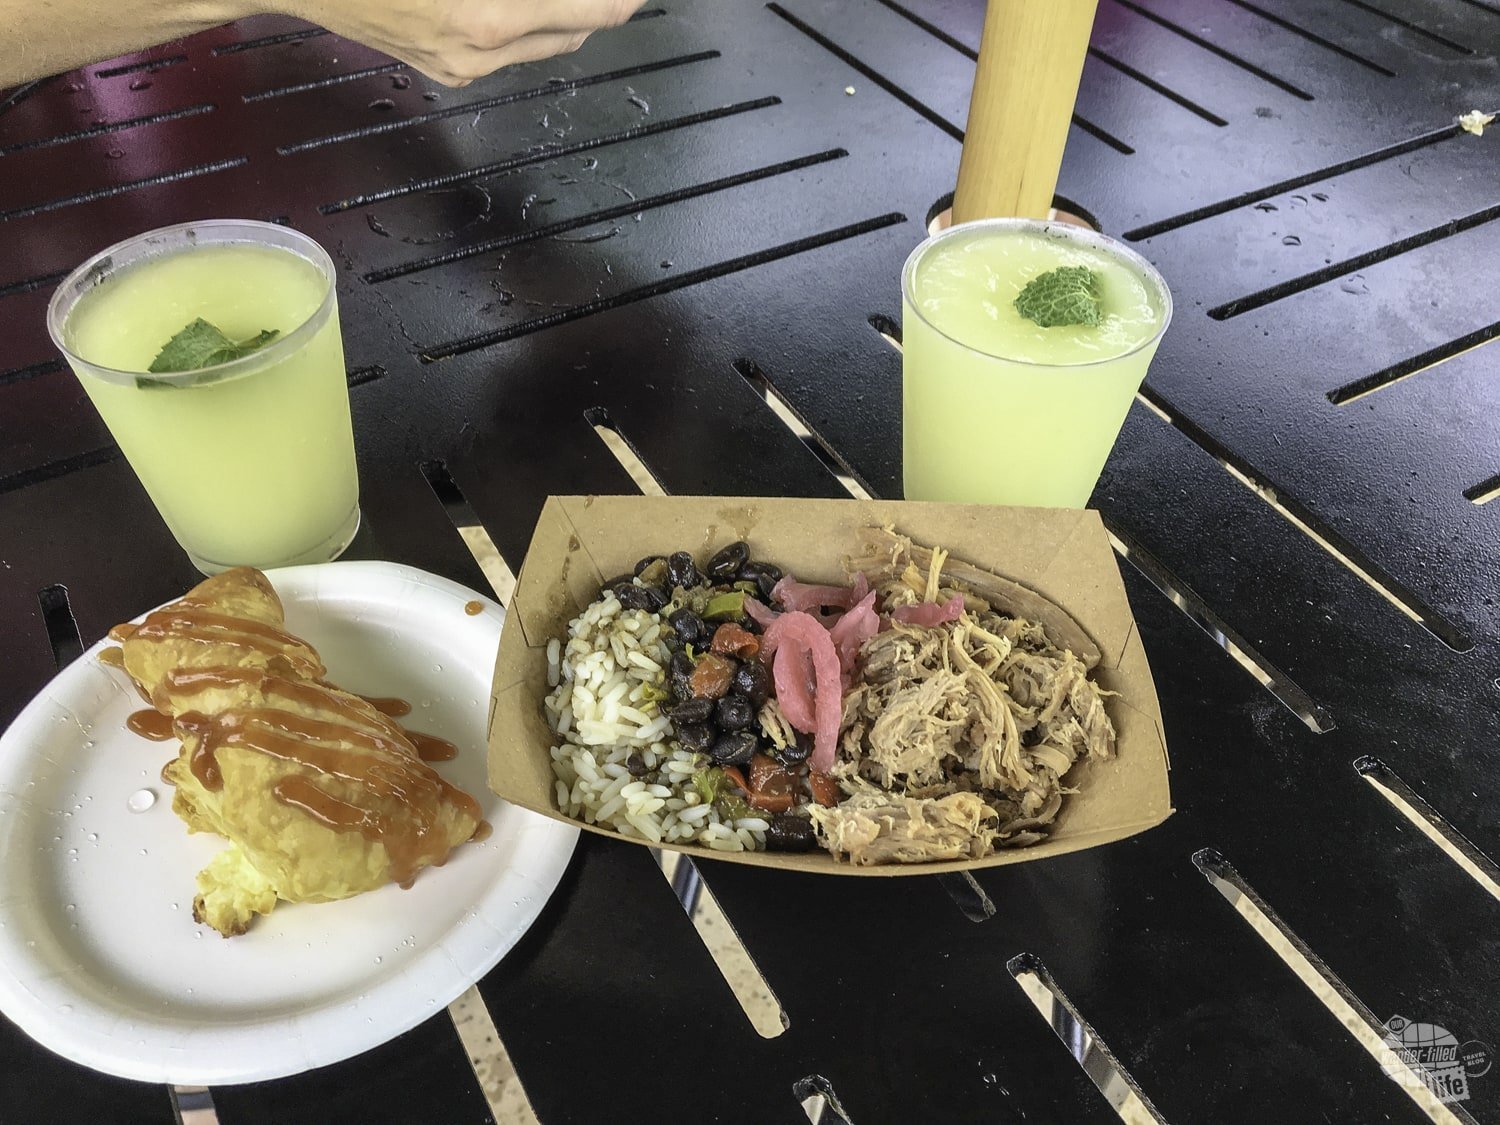 Dishes from the Islands of the Caribbean kiosk at the Food & Wine Festival.